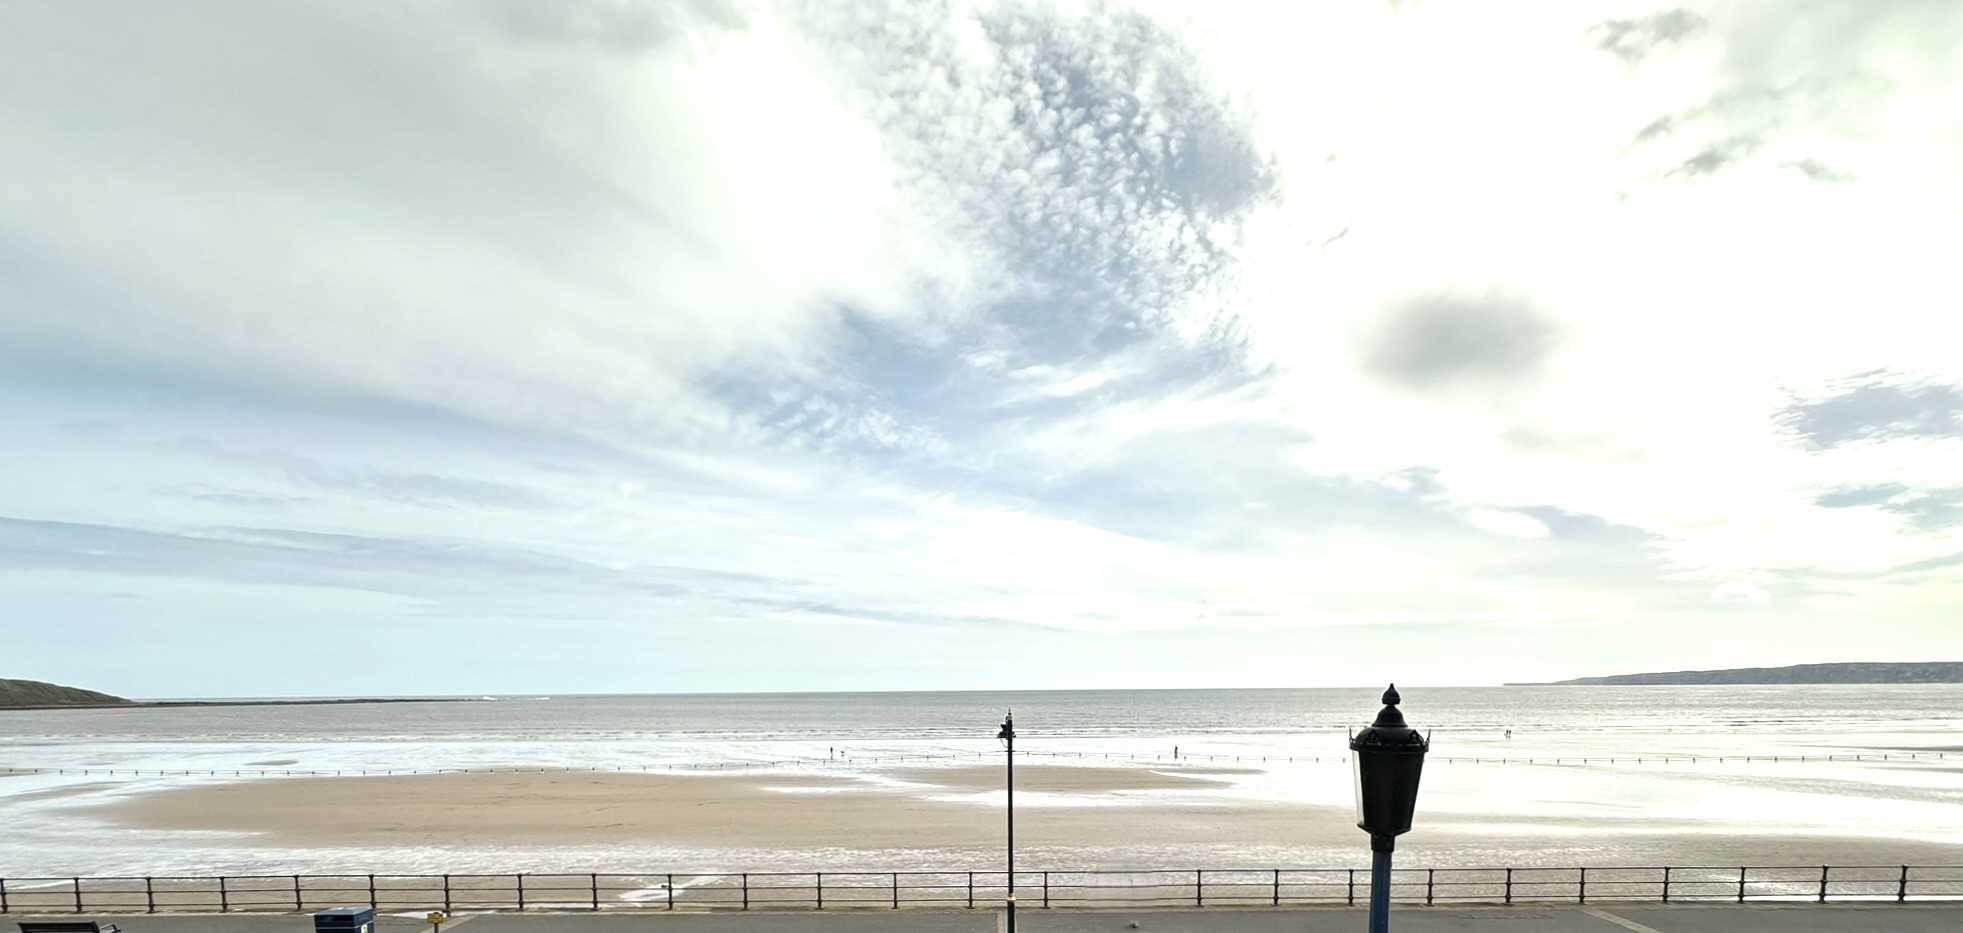 The Landings, The Beach, Filey - Picture 6